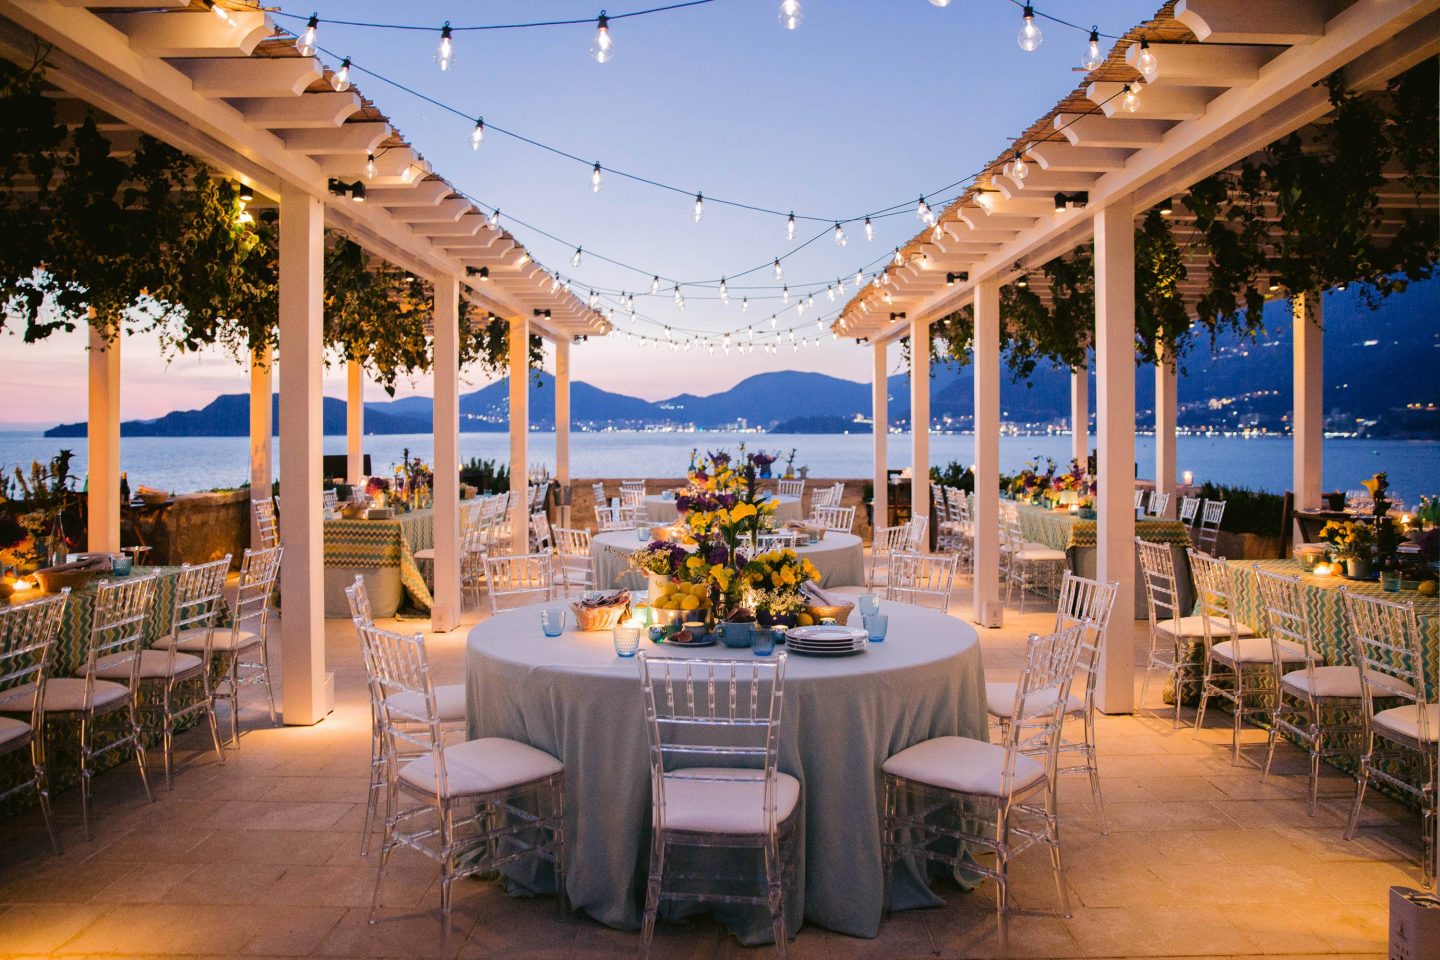 Table decor for a 60s-themed welcome party at this Aman Sveti Stefan Montenegro destination wedding weekend | Photo by Allan Zepeda